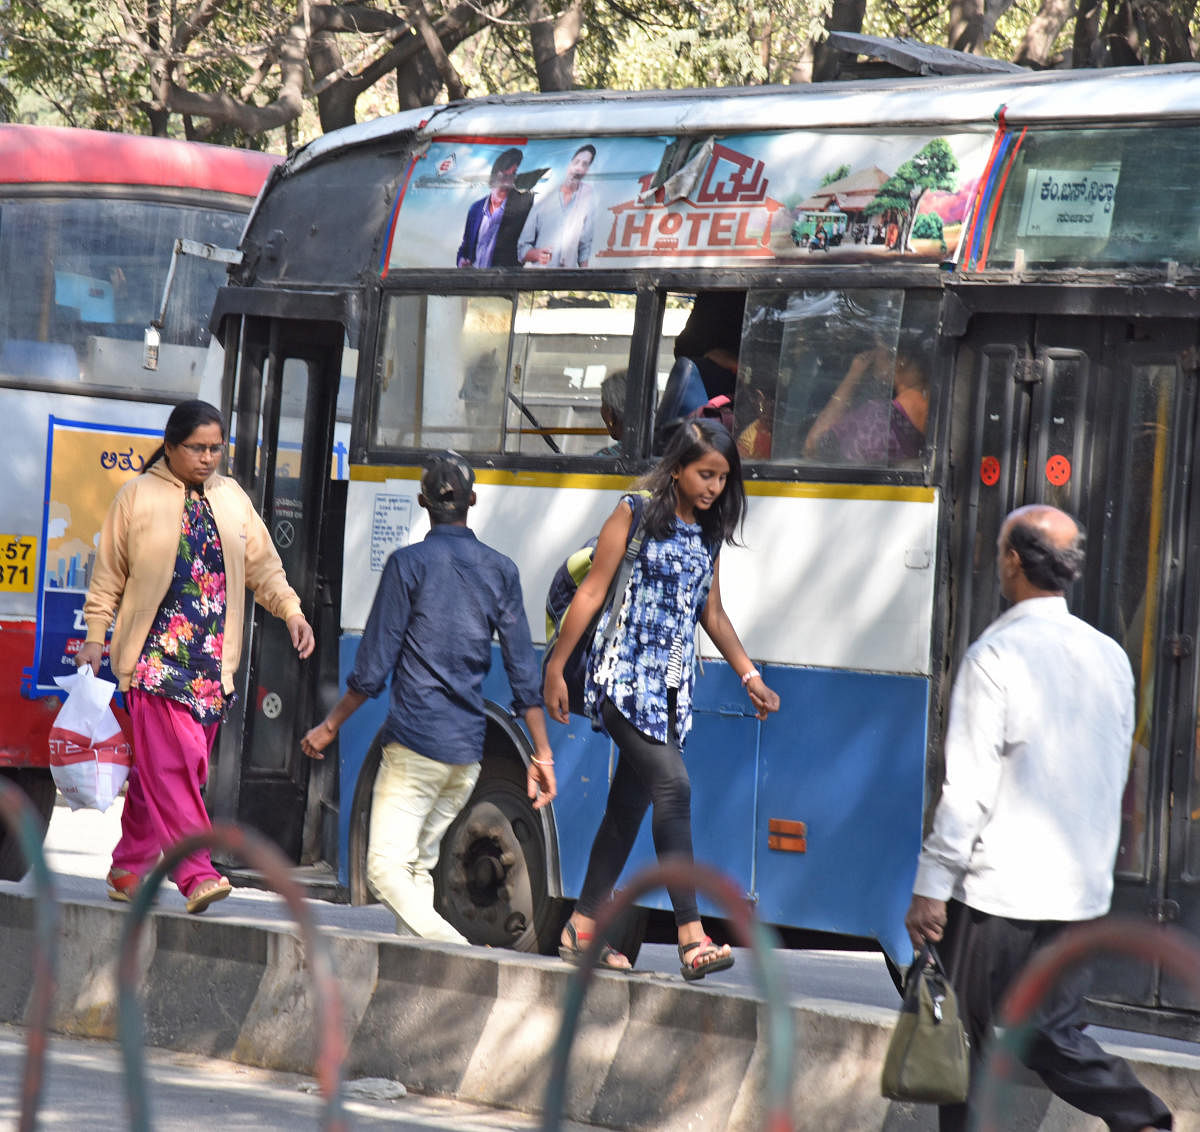 BMTC app lets you book tickets, cabs